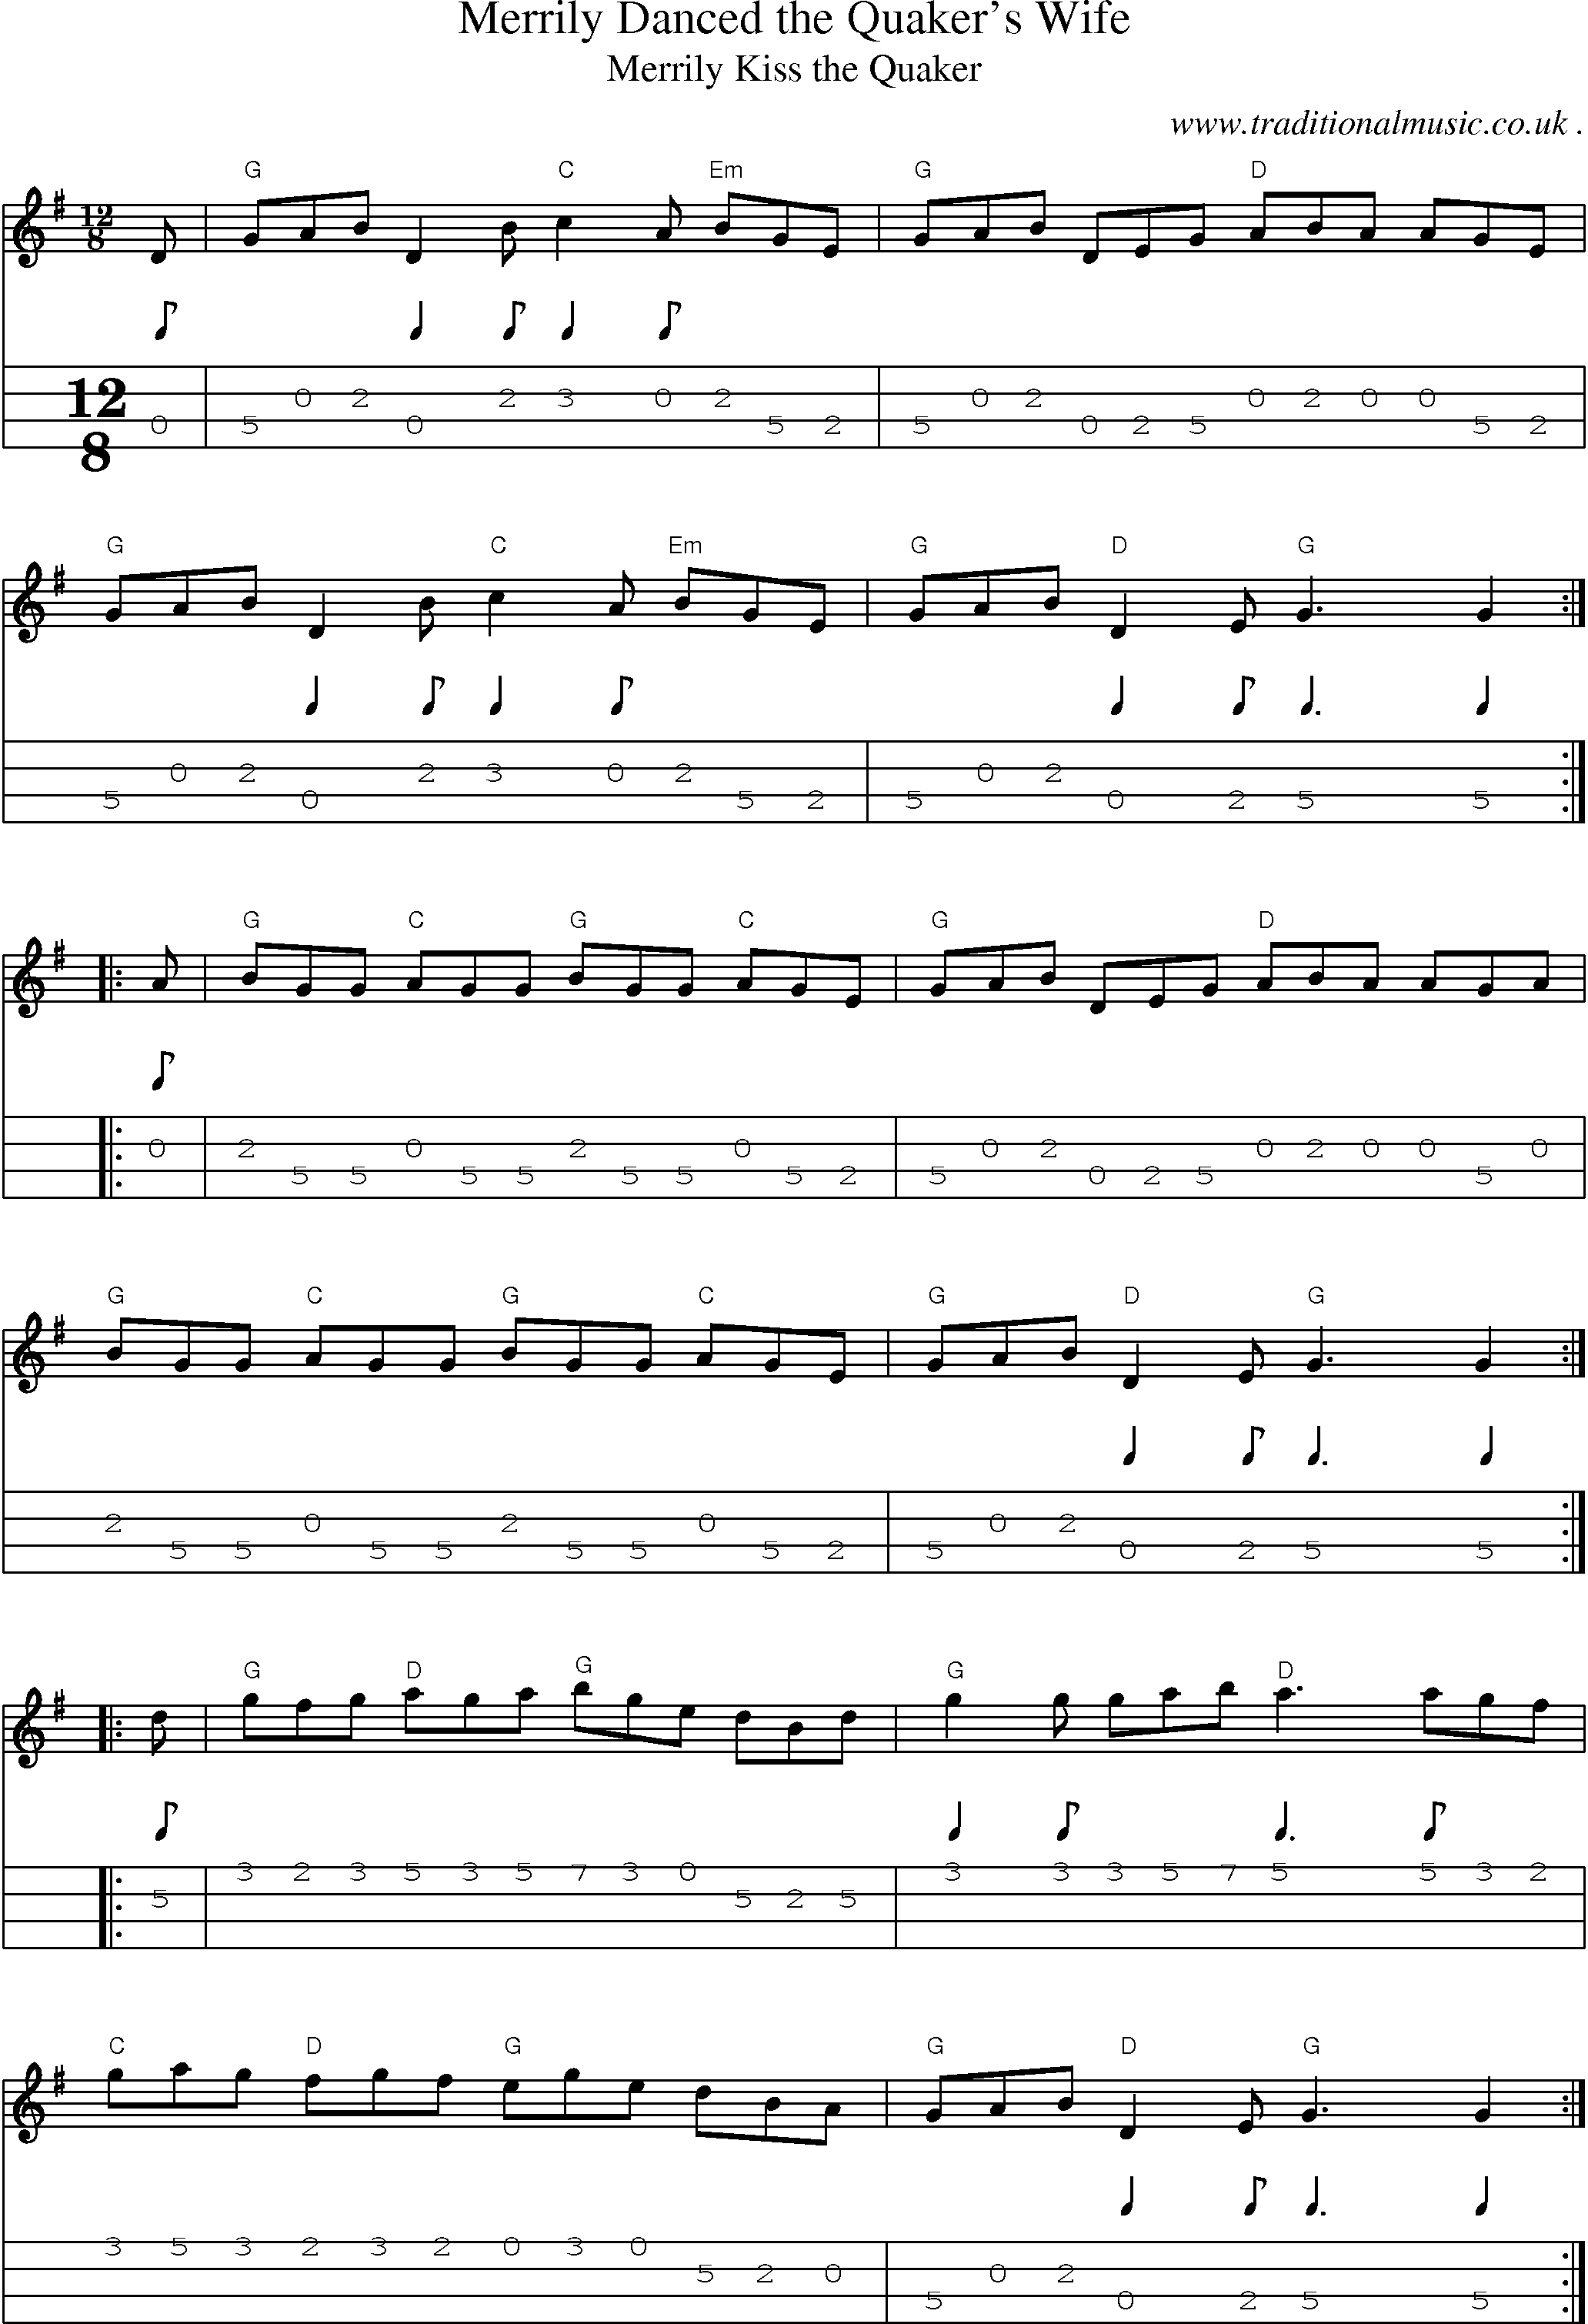 Music Score and Guitar Tabs for Merrily Danced the Quakers Wife